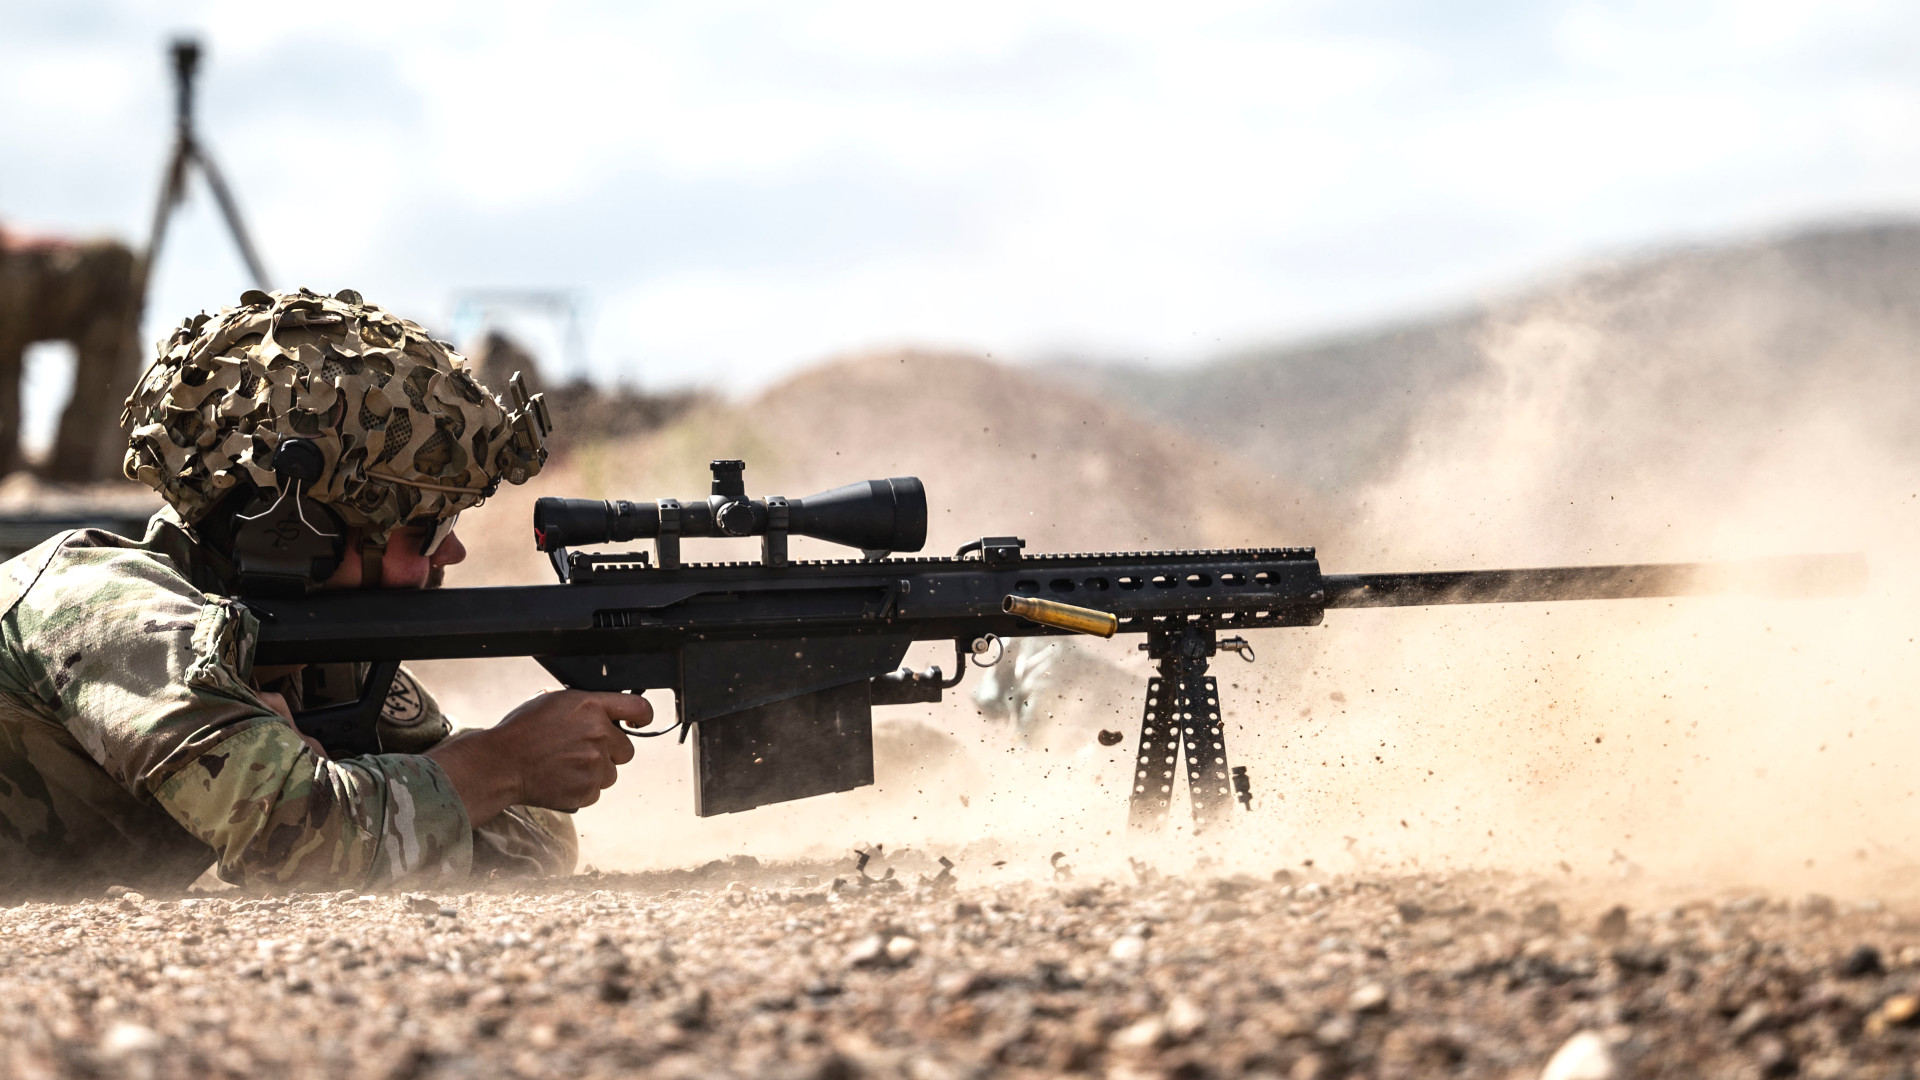 US Special Operations Command has laid out requirements for a new Extreme Long Range Sniper Rifle that could replace its Barrett M82/M107 and Mk 15 .50 caliber rifles.